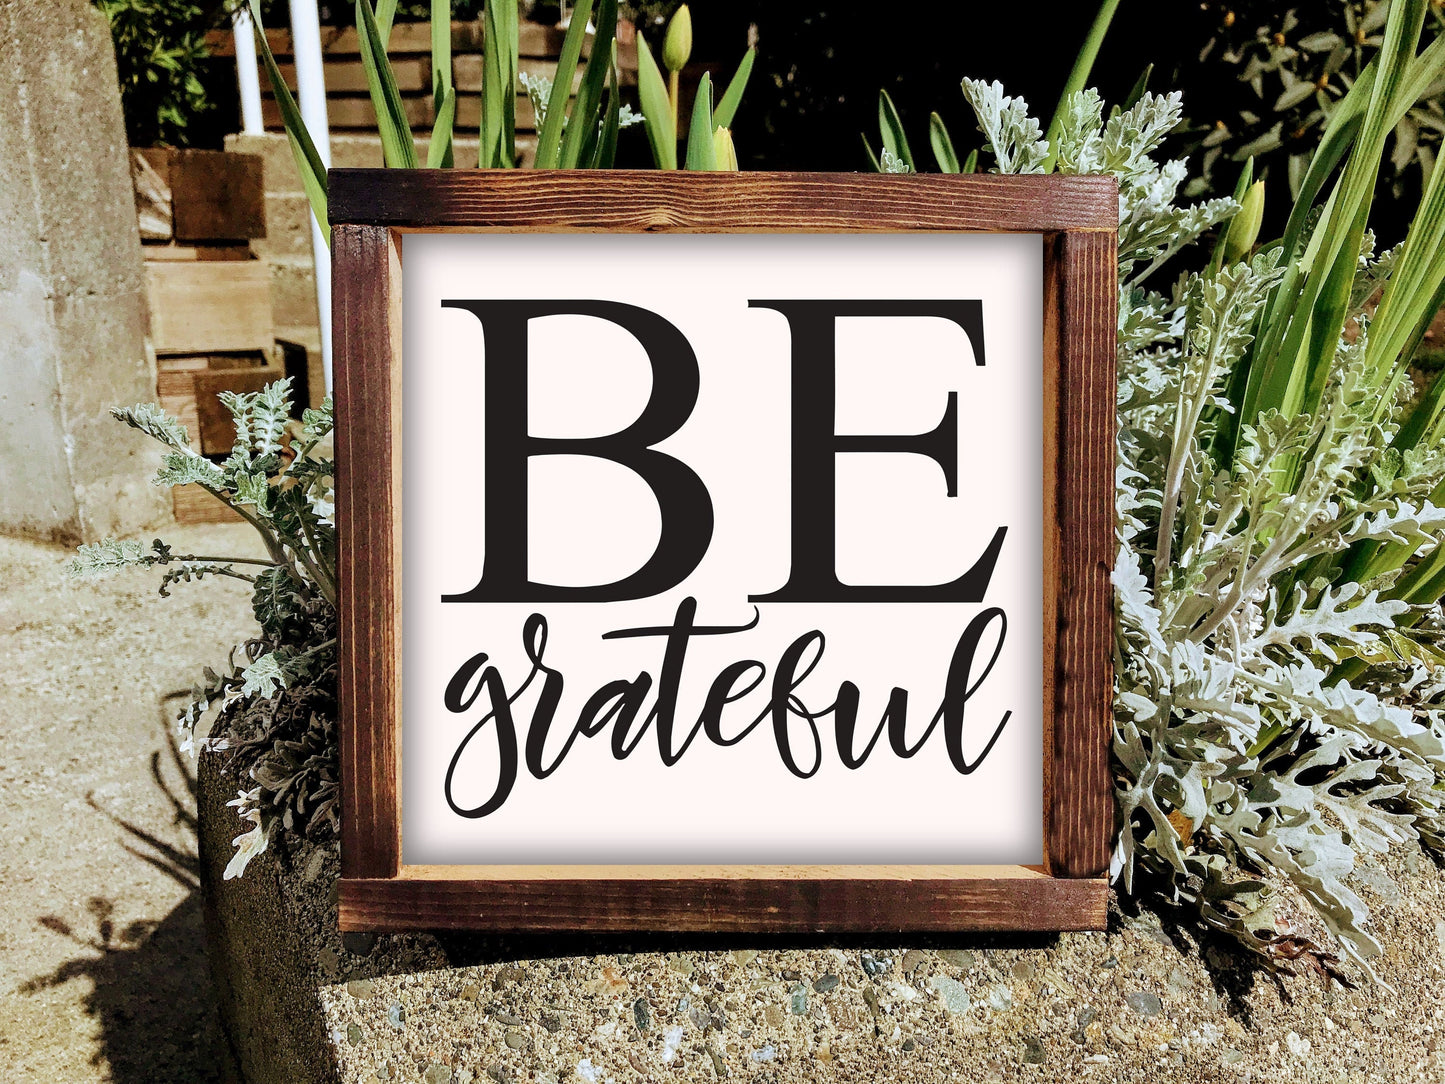 Start Each Day with a Greatful Heart,Grateful Sign,Inspirational Wood Signs,Framed Wood Signs,Wood Sign,Framed Signs,Bible Verse Sign